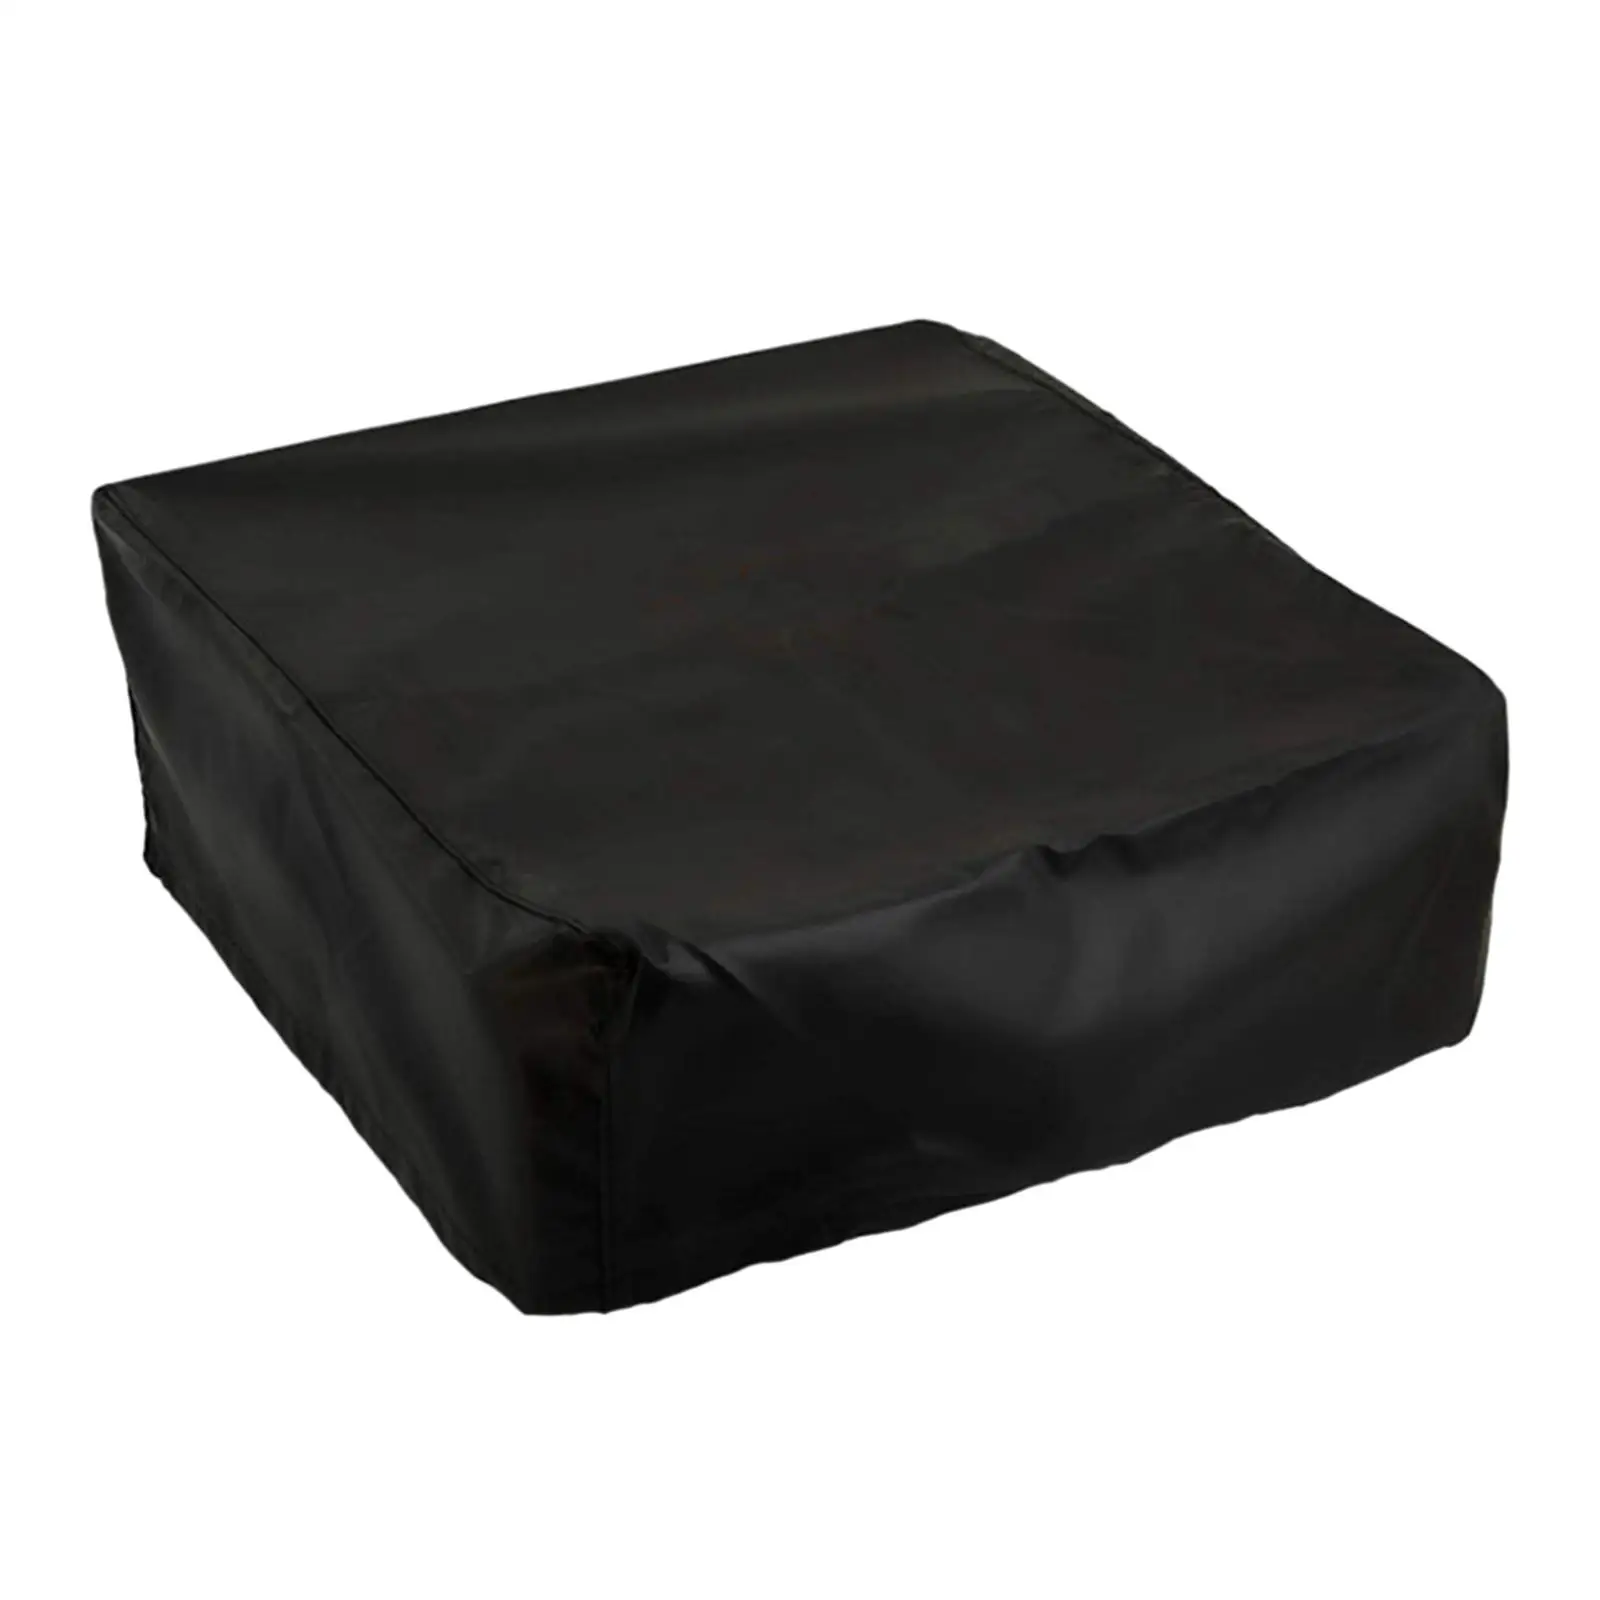 Outdoor Grill Cover Waterproof Weather Protection Heavy Duty Portable Griddle Cover for Home Bbq Outdoor Restaurant